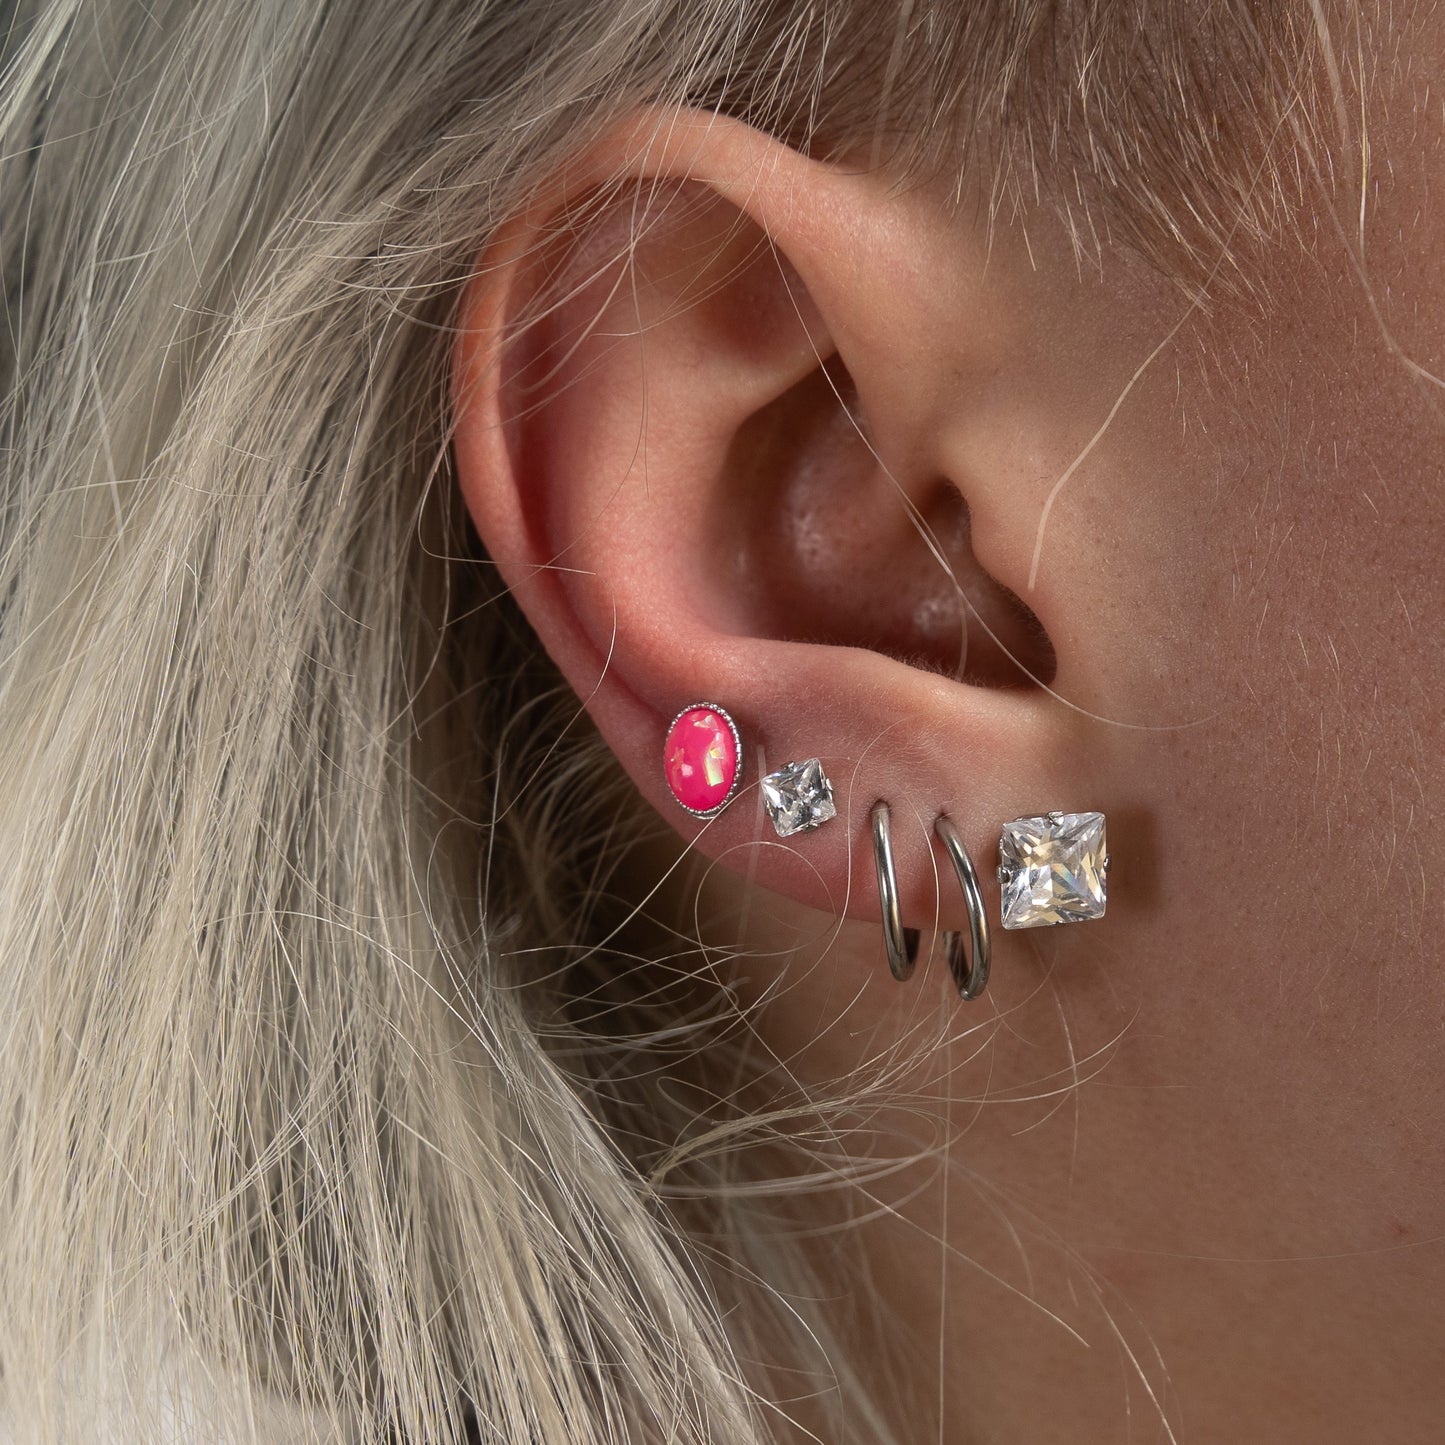 Model wearing the 316L surgical steel earrings that boast a stunning square, prong-set cubic zirconia, in two different lobe piercings, in different sizes.